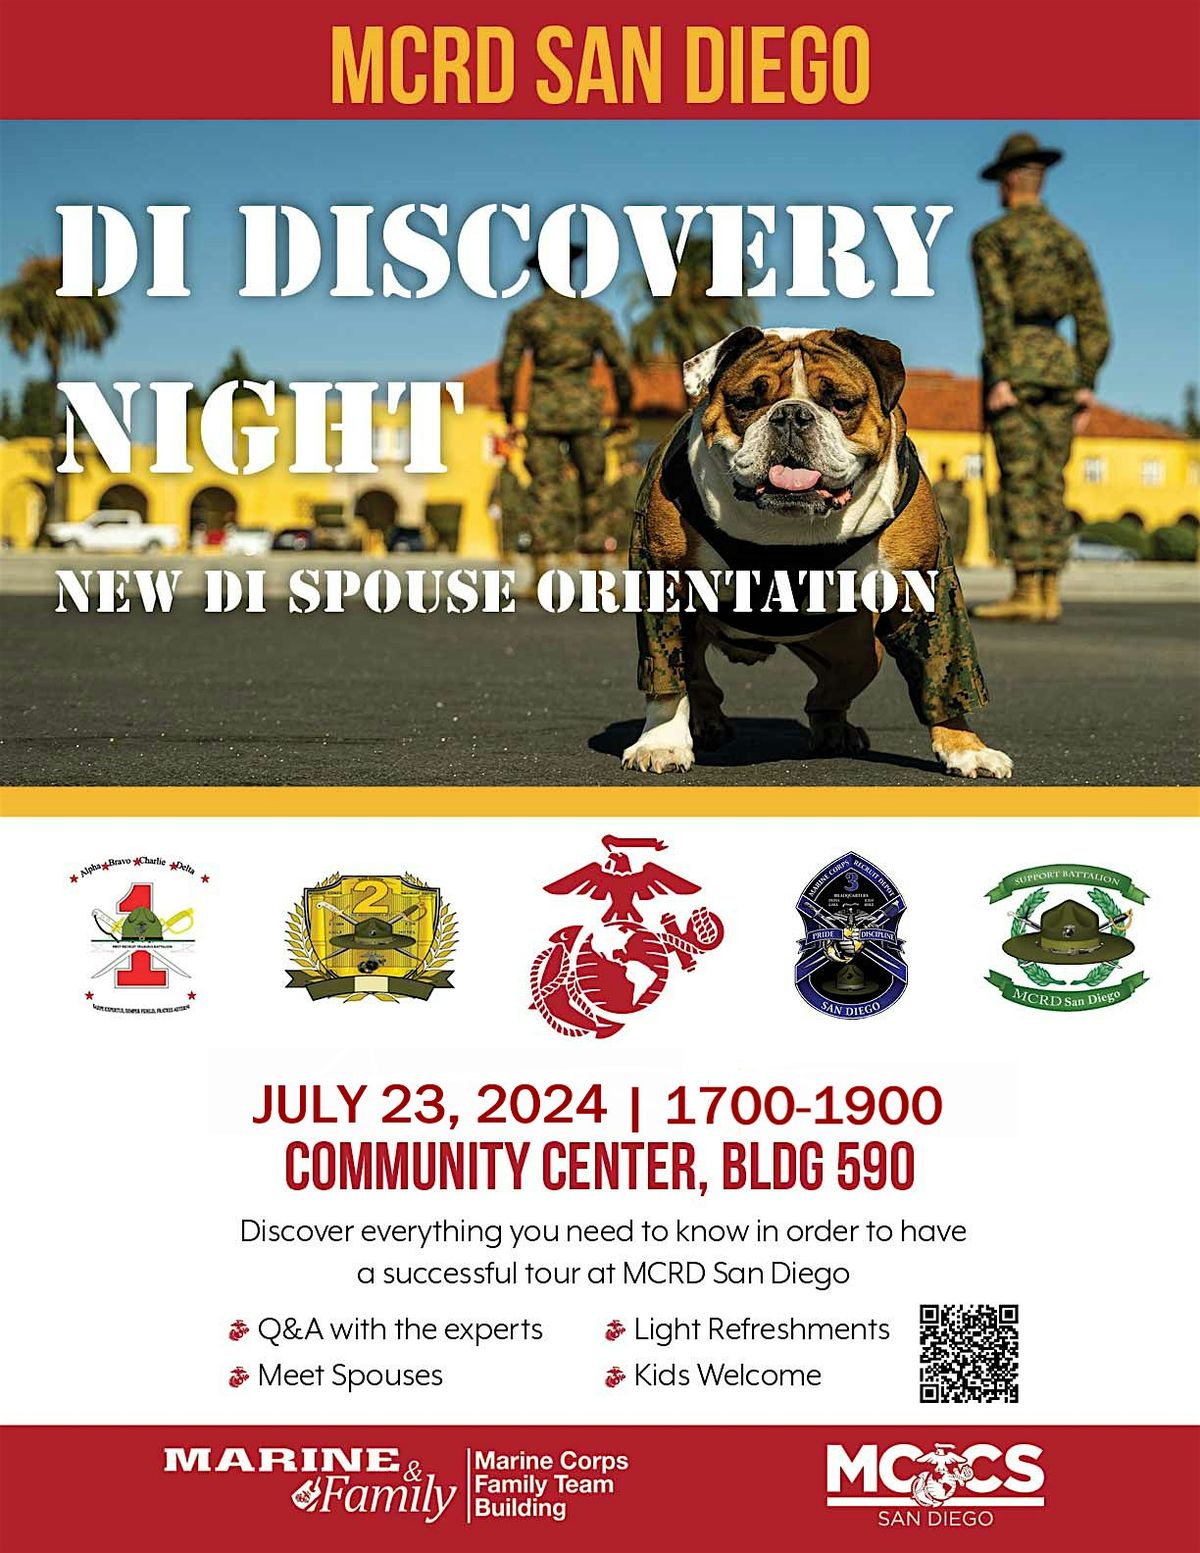 New DI Spouse Discovery Night